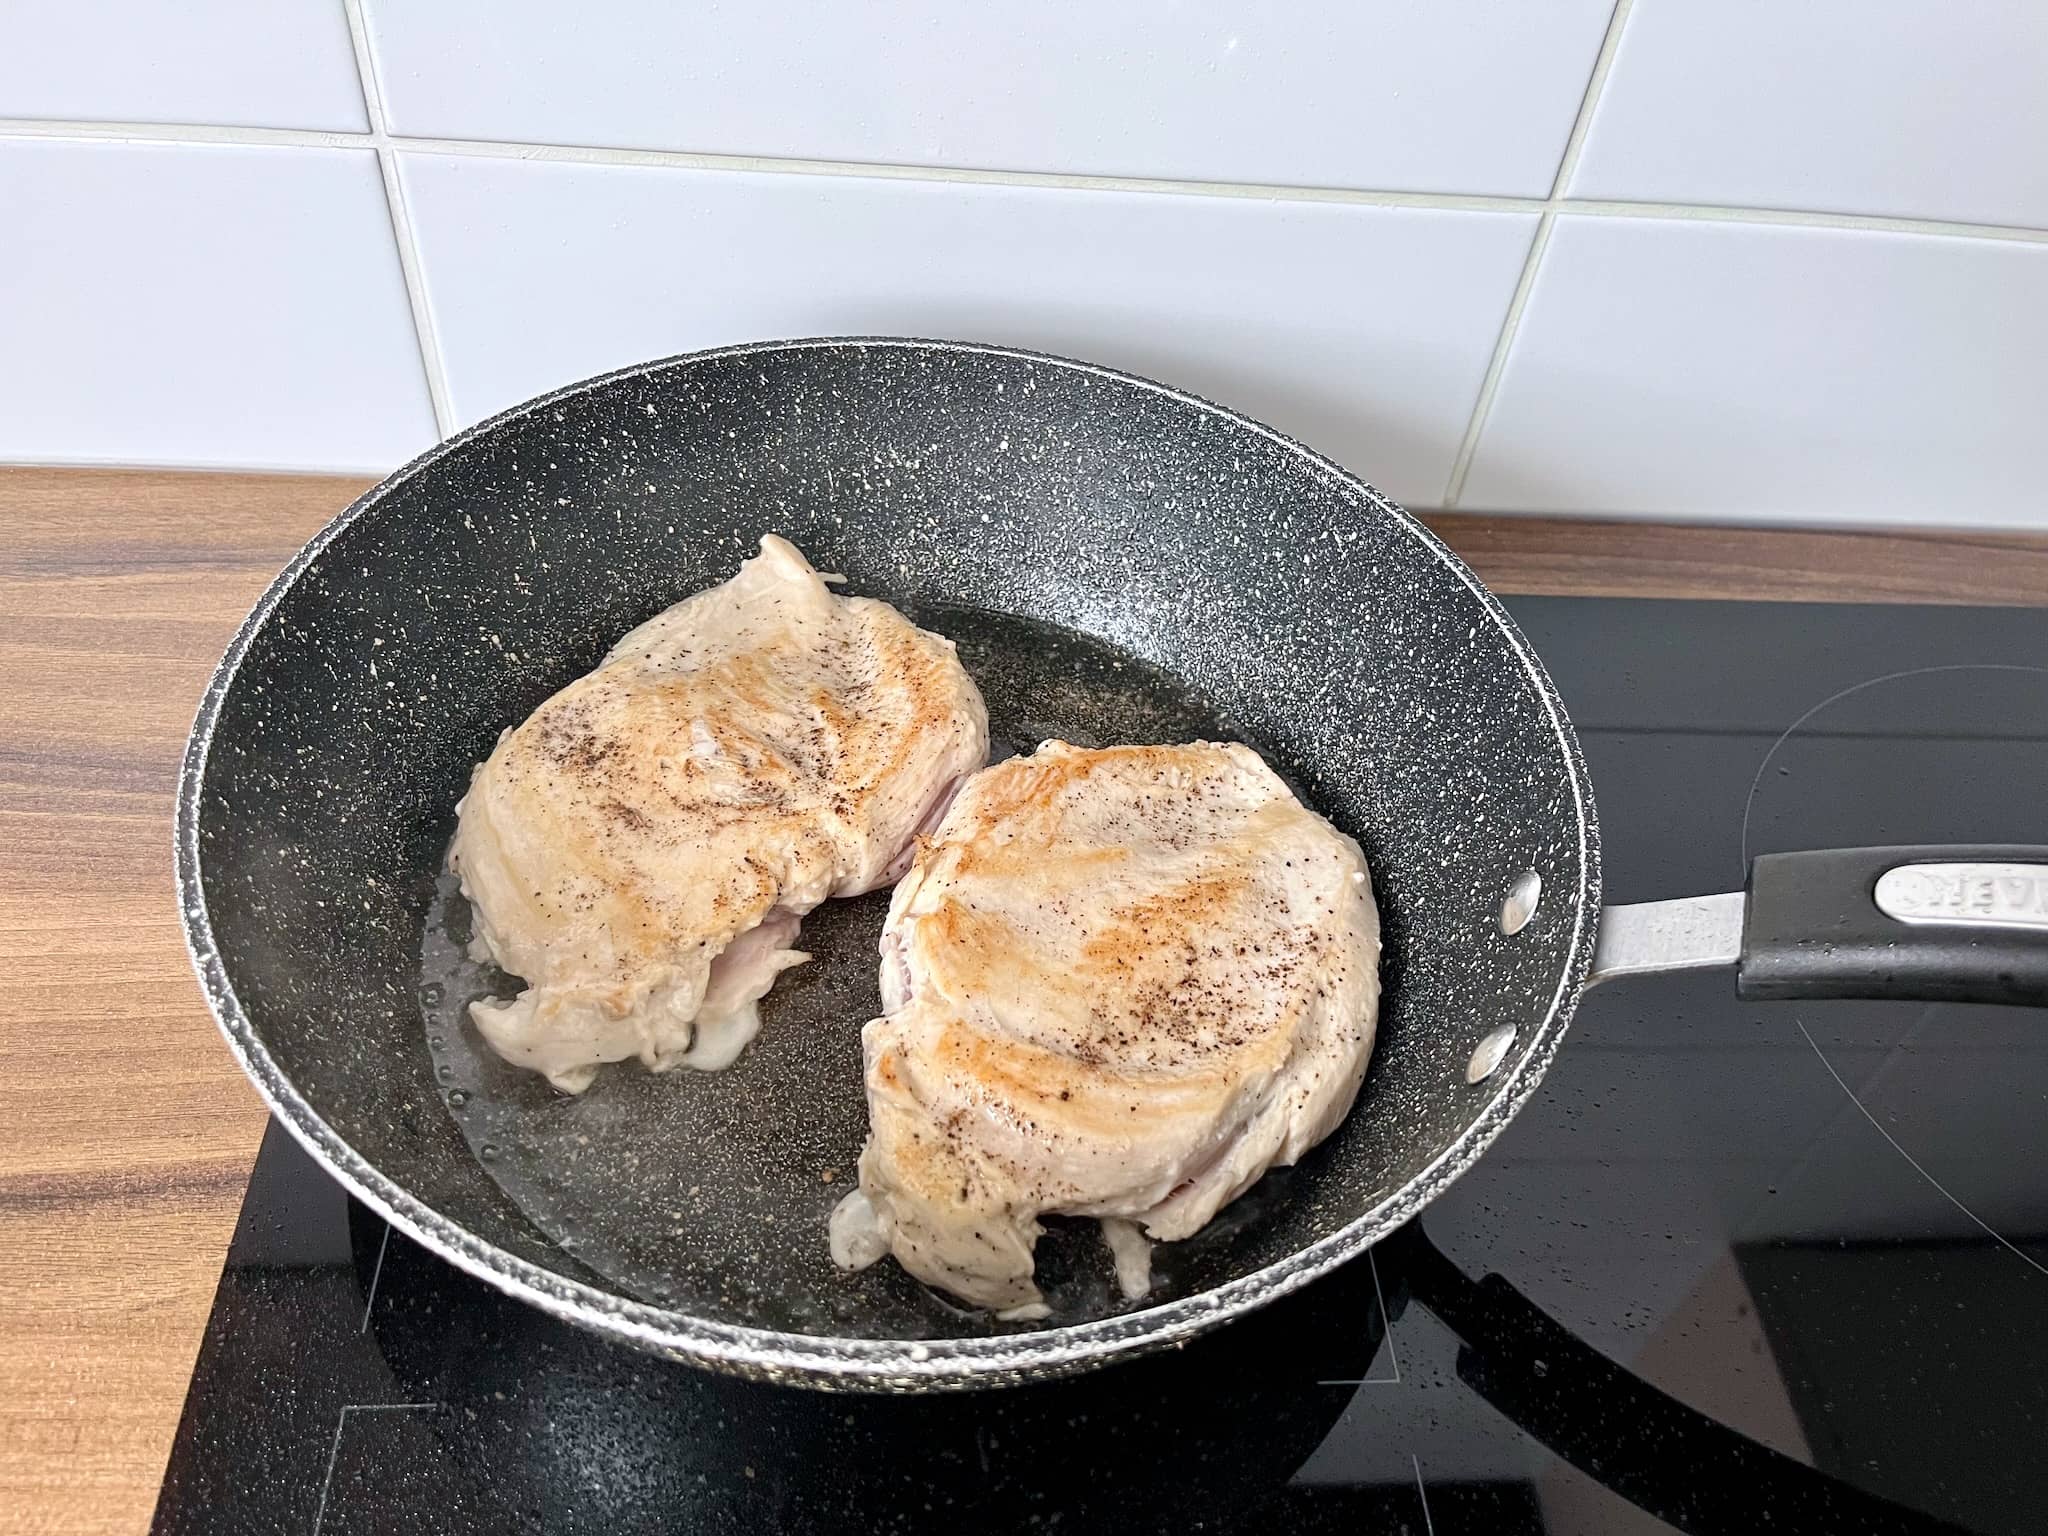 Chicken breasts frying in a pan